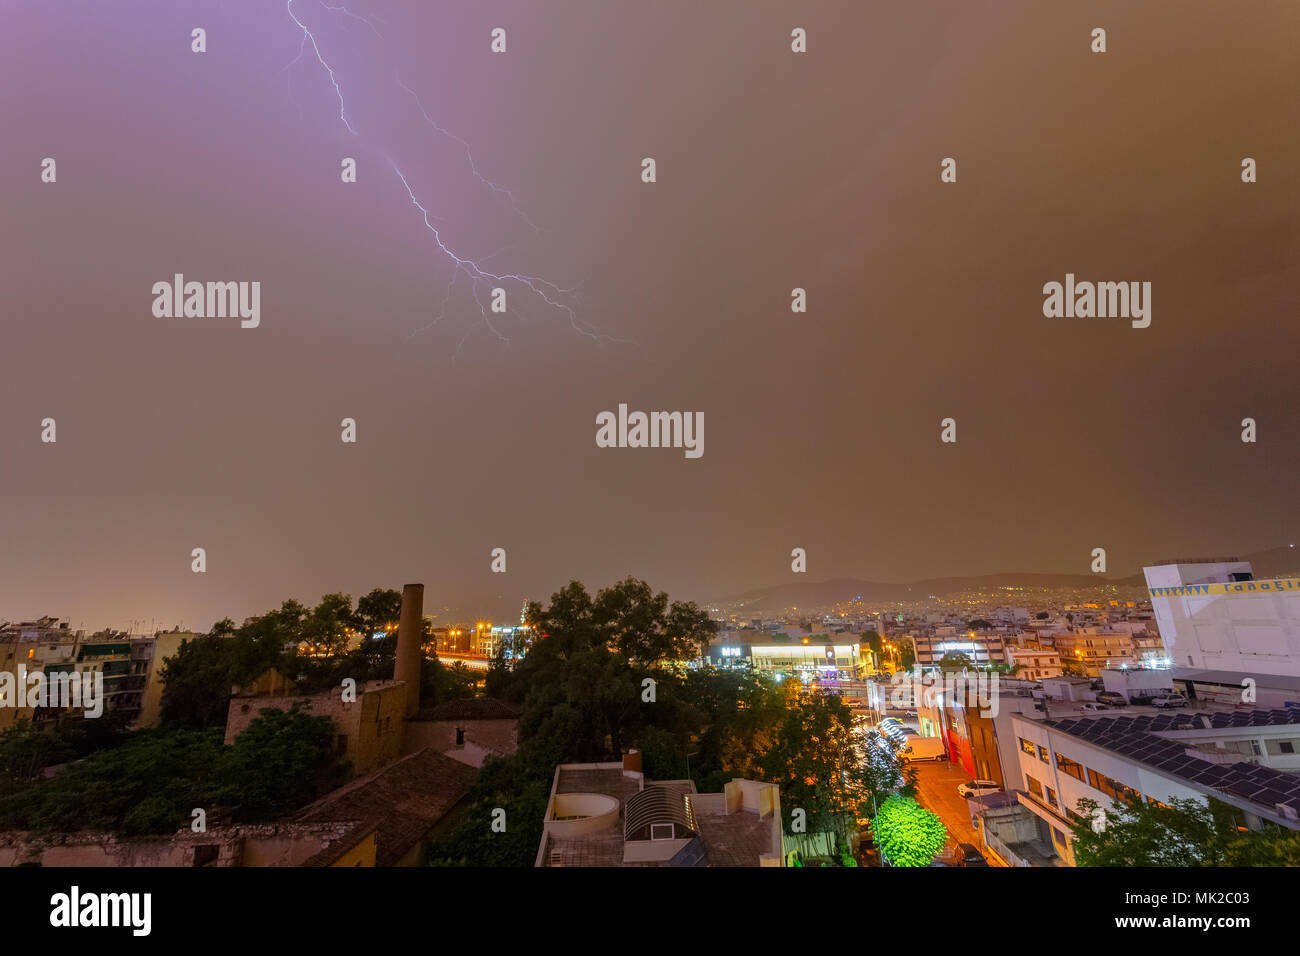 Intense stormy weather night with lightning bolts and thunderbolts against a dark cloudy sky.  Sudden seasonal weather changes often find city service Stock Photo